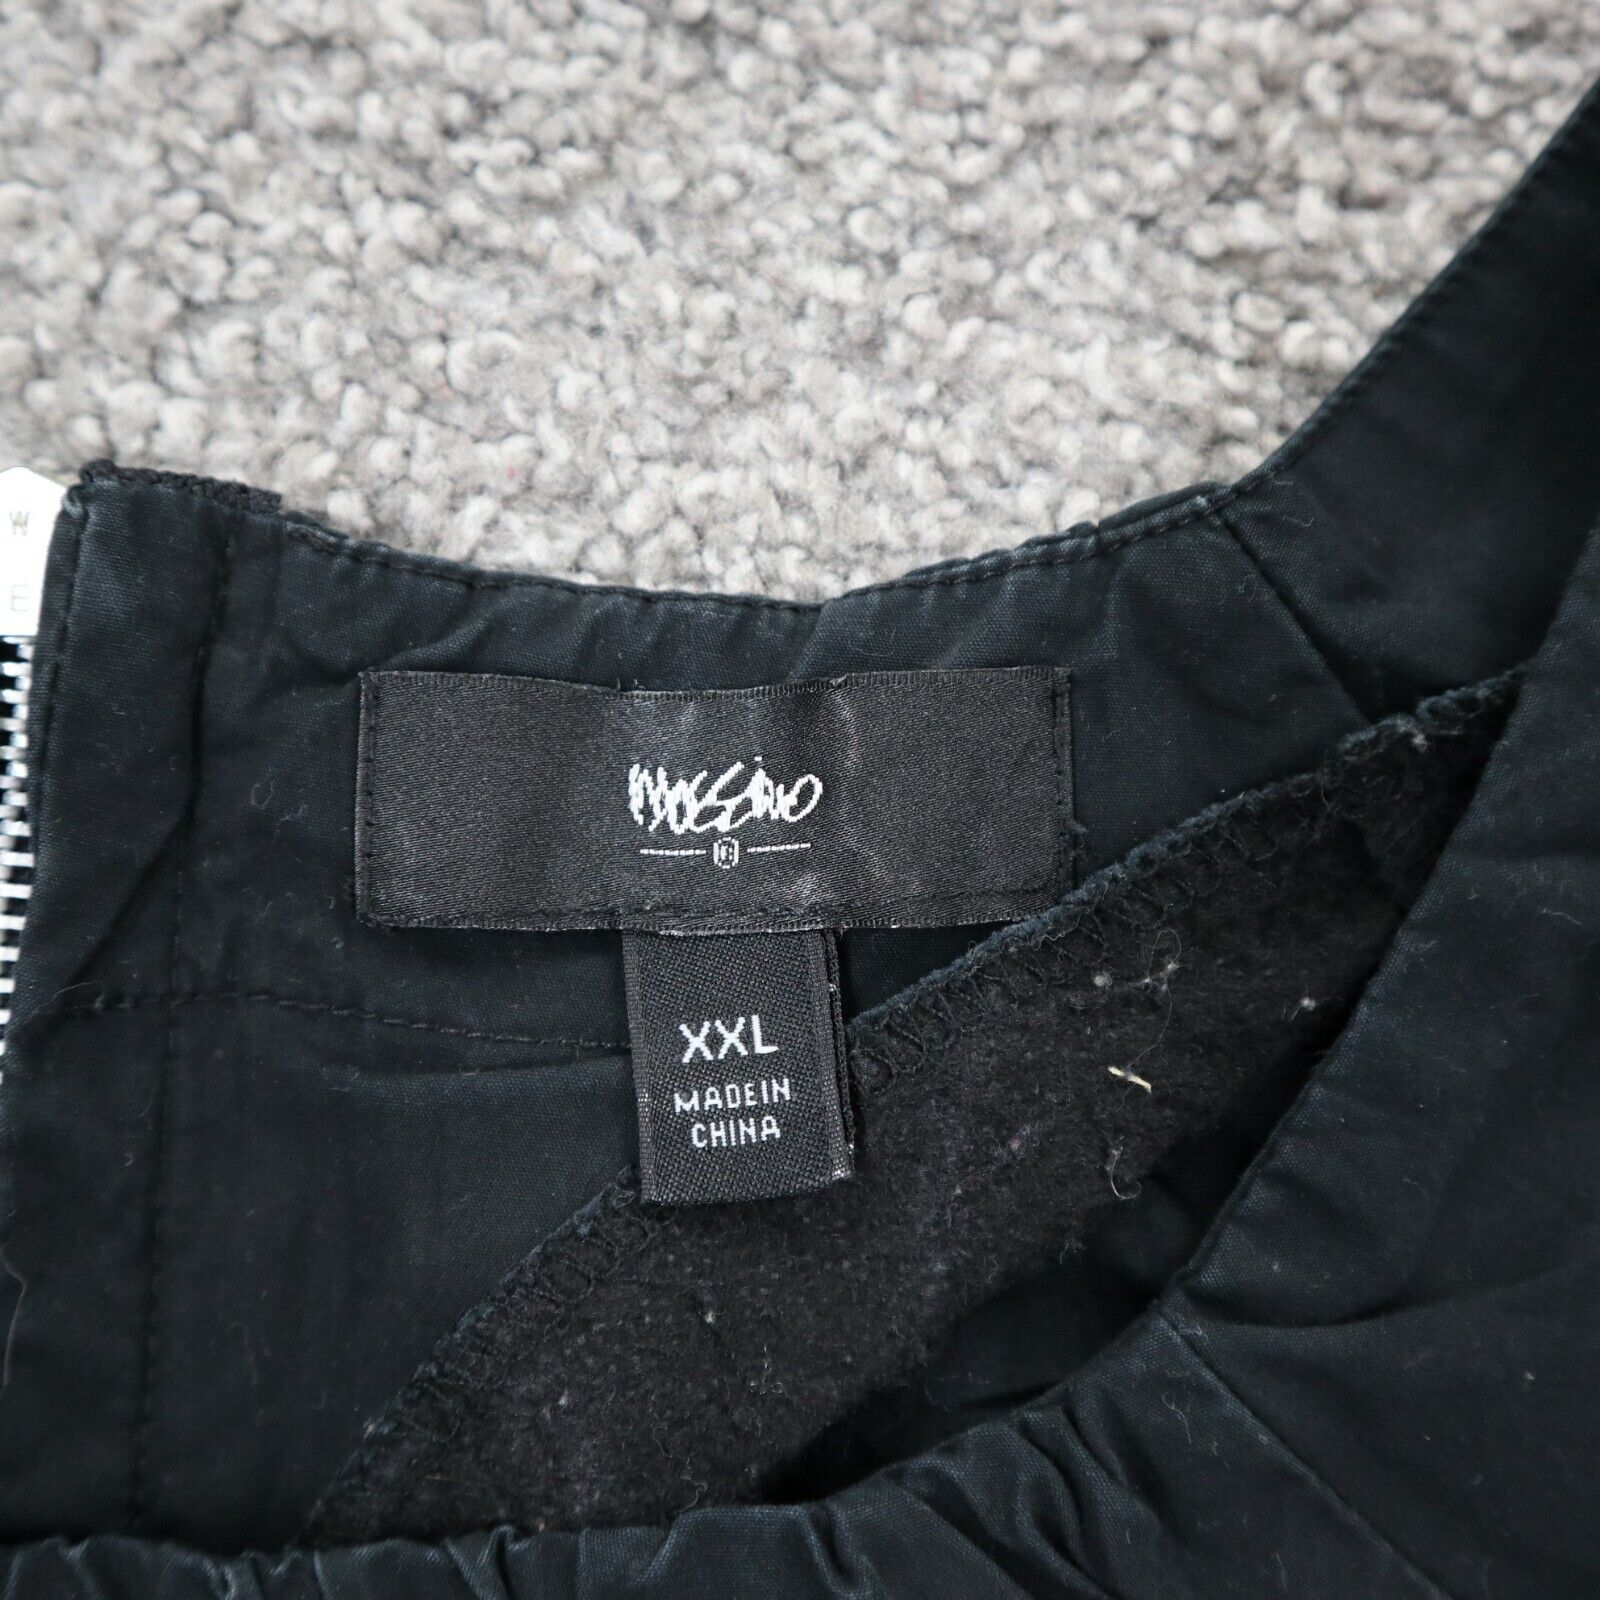 Mossimo Leggings Black Brand New with brand down the side.